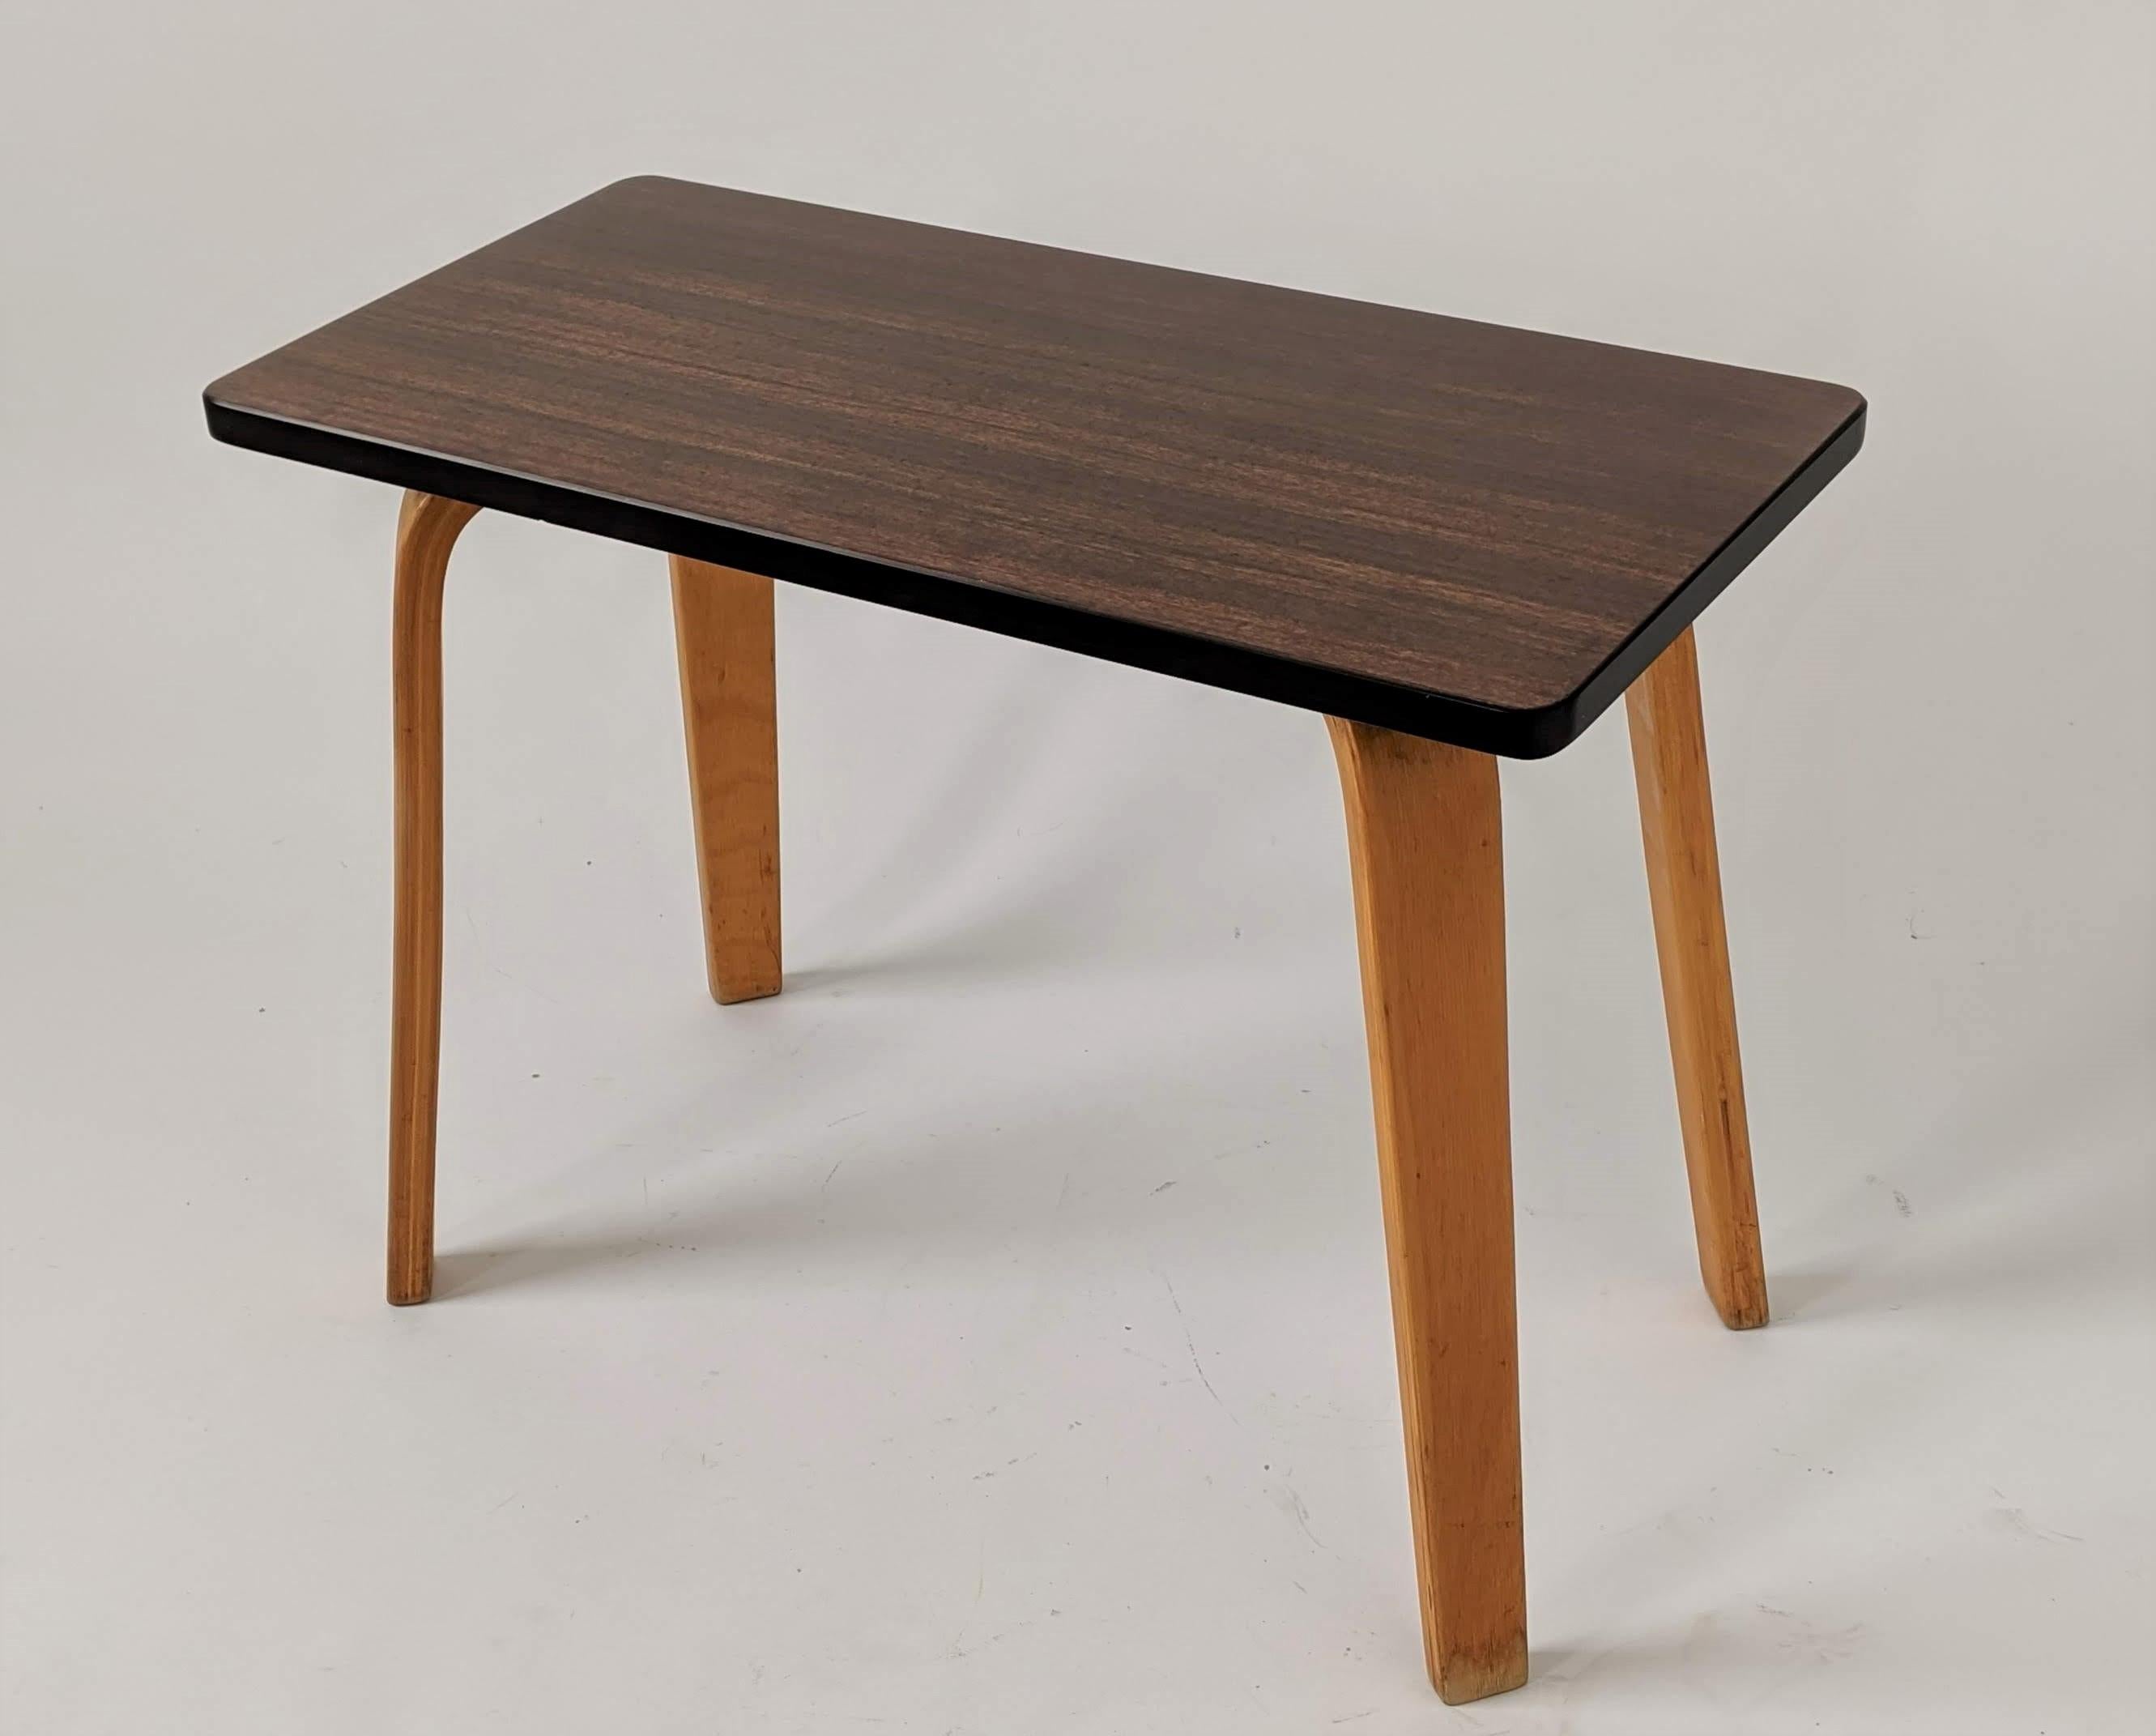 1940s Thonet Formica Woodgrain finish  Side Table on Bentwood legs, USA For Sale 8